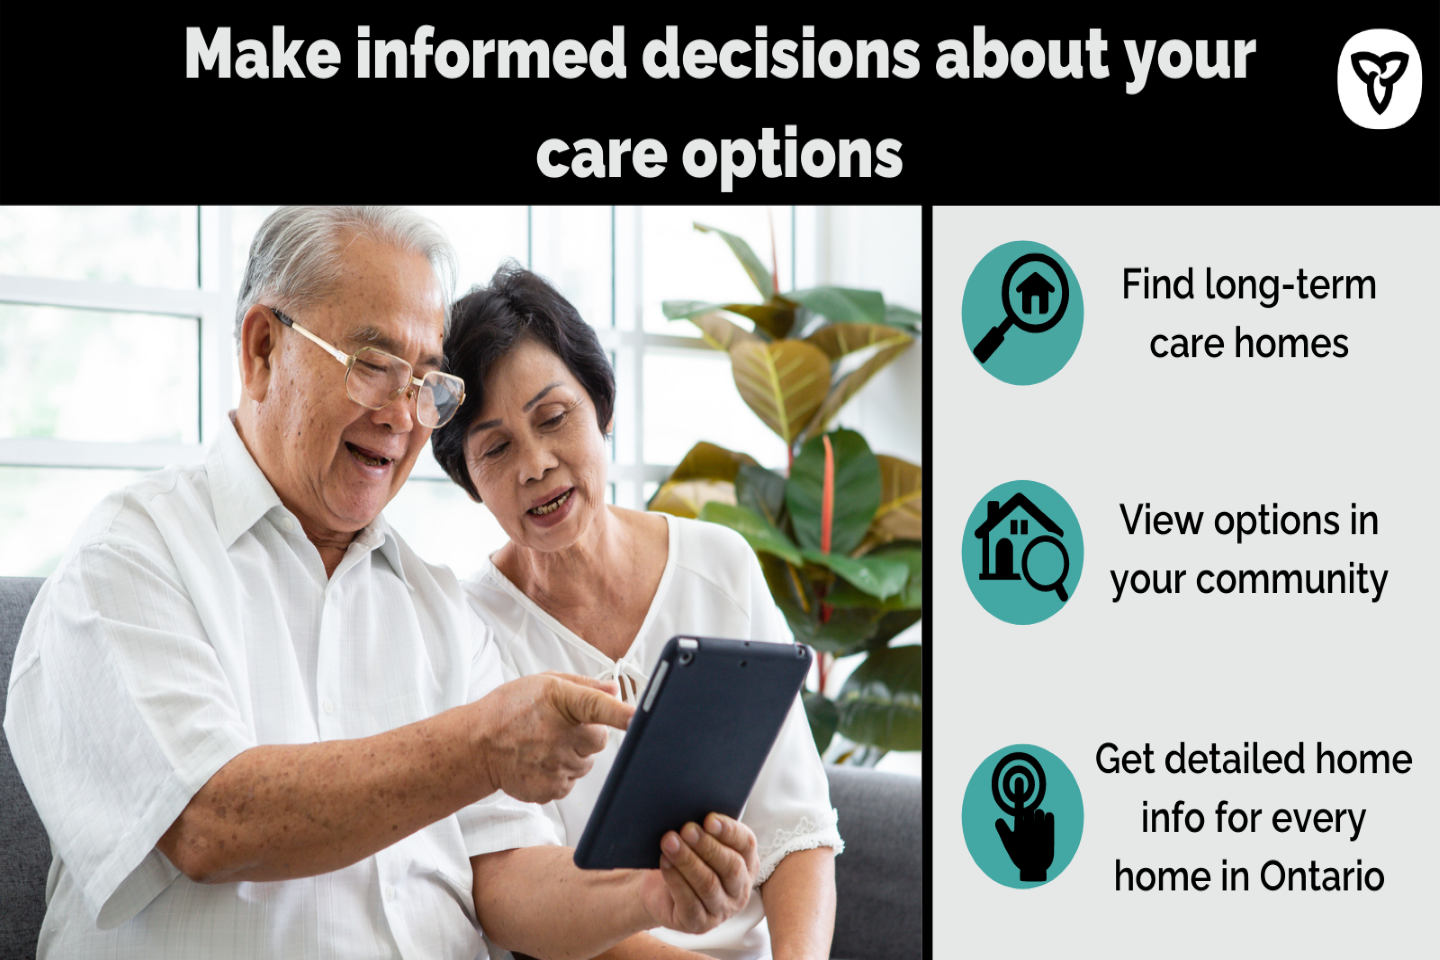 Launching the Long-Term Care Homefinder